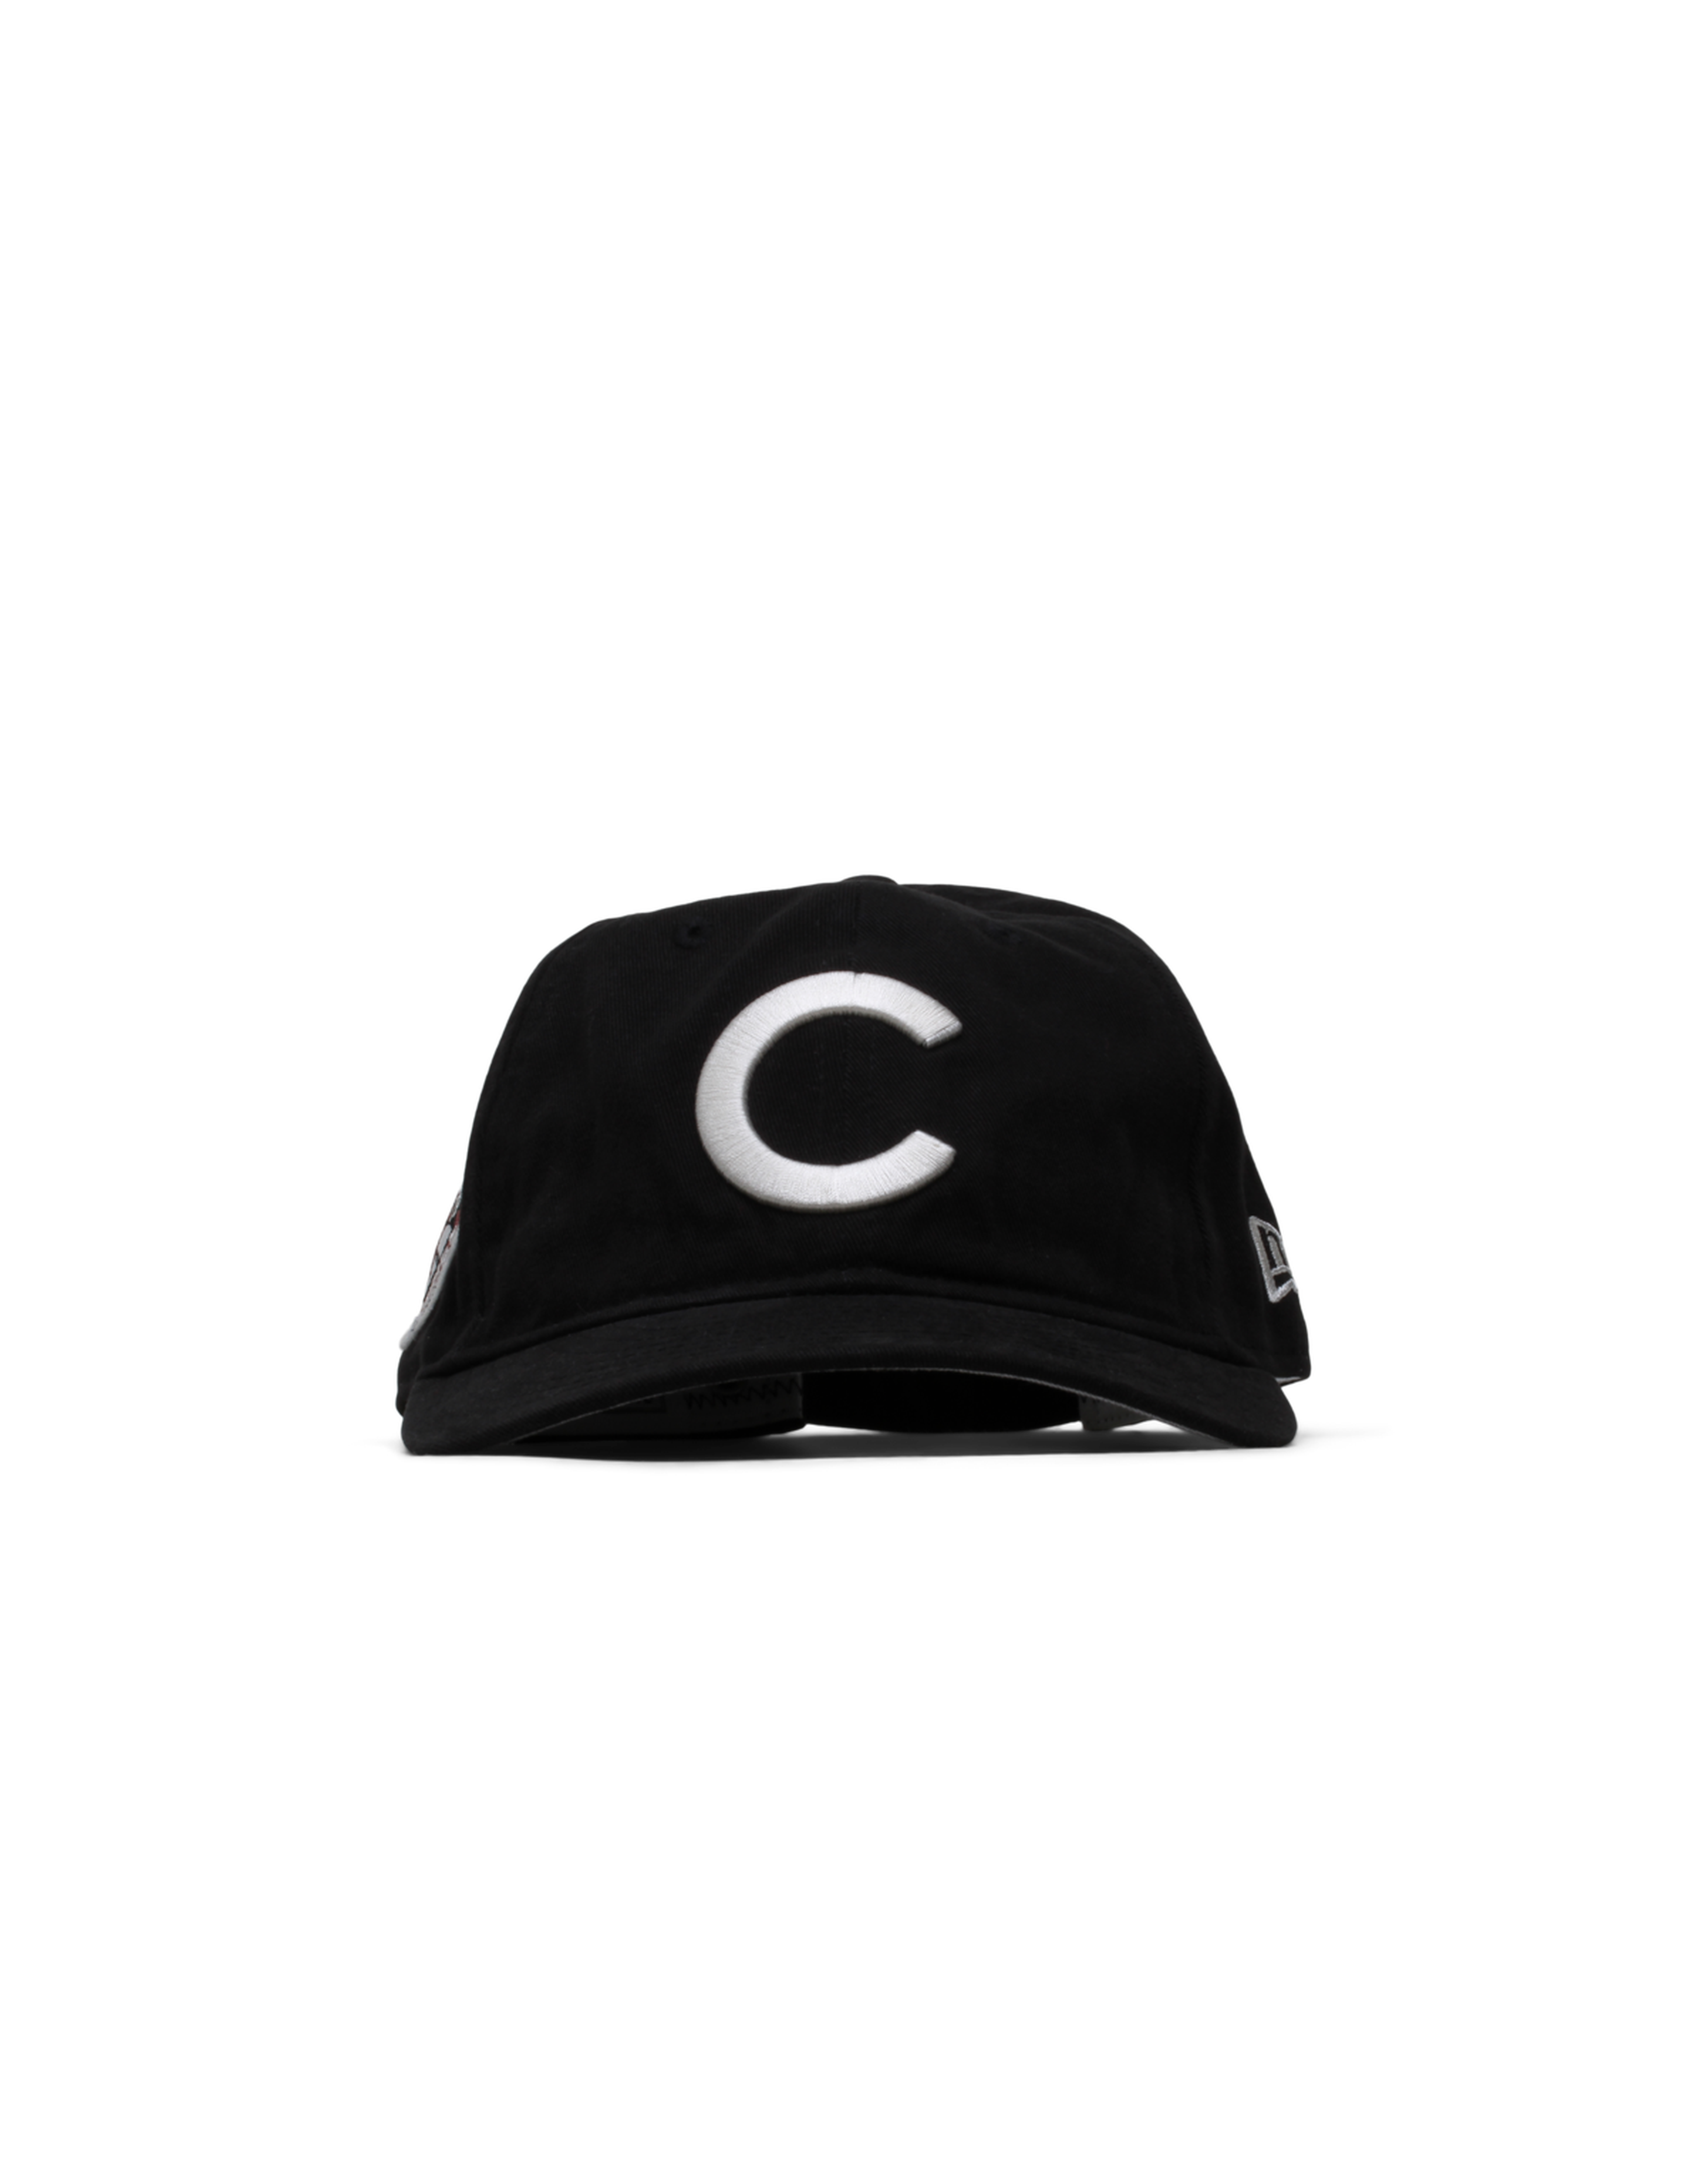 Chicago Cubs 9FIFTY Adjustable Cap